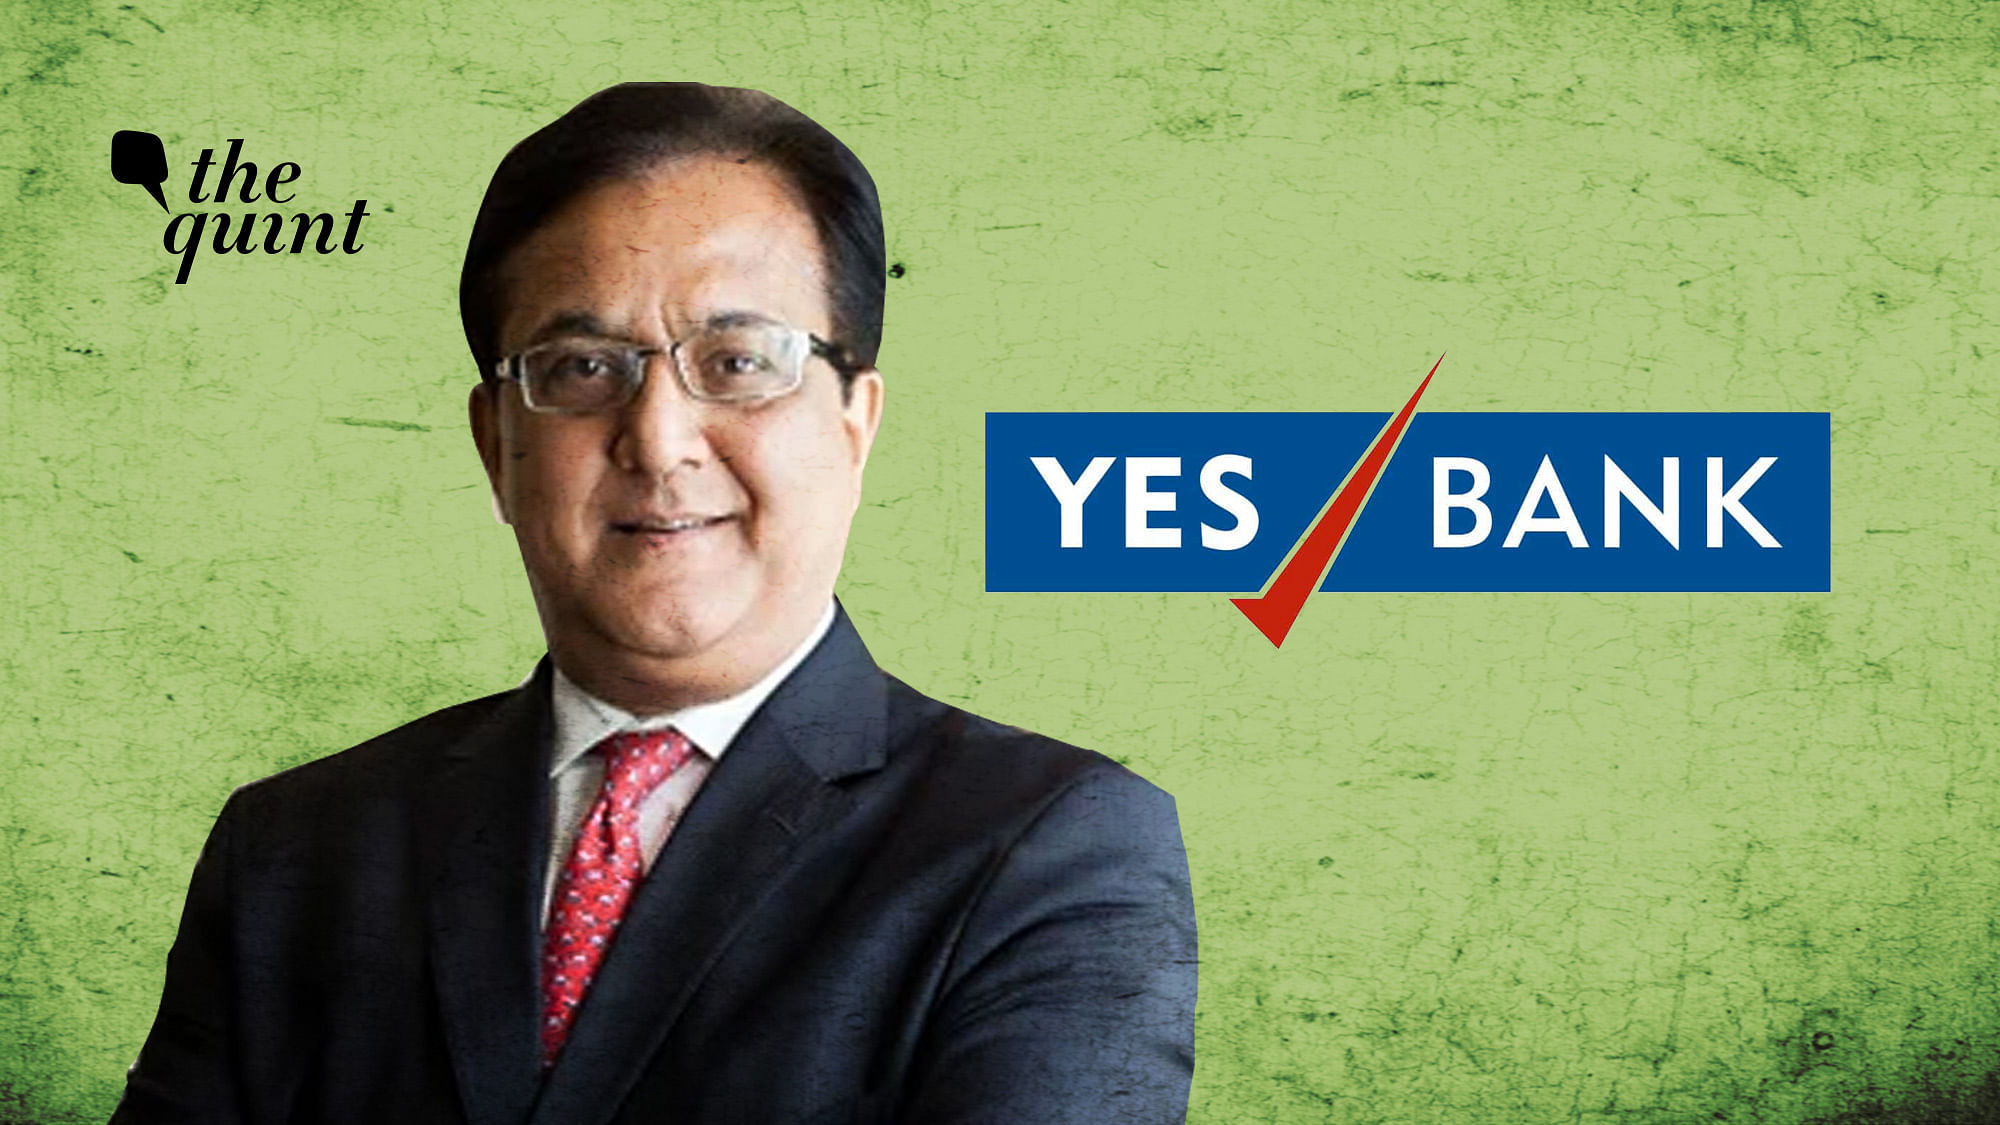 Image of the co-founder, and former managing director and CEO of Yes Bank, Rana Kapoor, used for representational purposes.